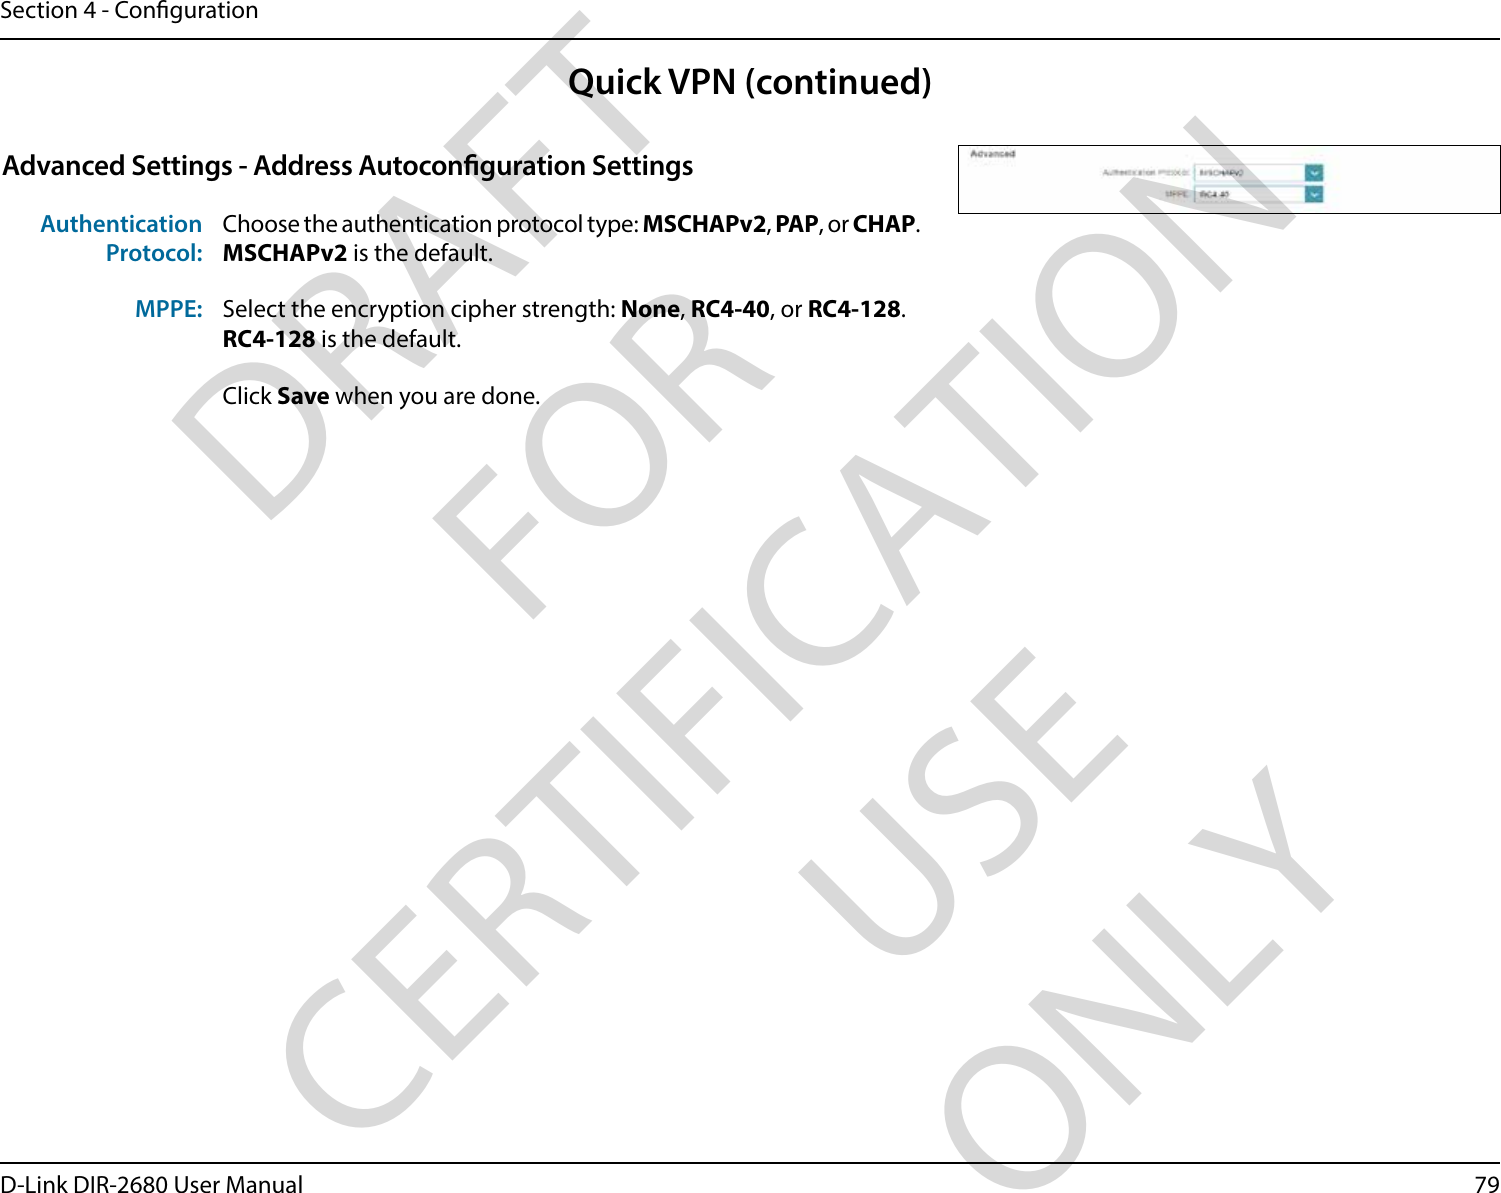 79D-Link DIR-2680 User ManualSection 4 - CongurationAdvanced Settings - Address Autoconguration SettingsAuthentication Protocol:Choose the authentication protocol type: MSCHAPv2, PAP, or CHAP.MSCHAPv2 is the default.MPPE: Select the encryption cipher strength: None, RC4-40, or RC4-128.RC4-128 is the default.Click Save when you are done.Quick VPN (continued)DRAFT FOR CERTIFICATION USE ONLY